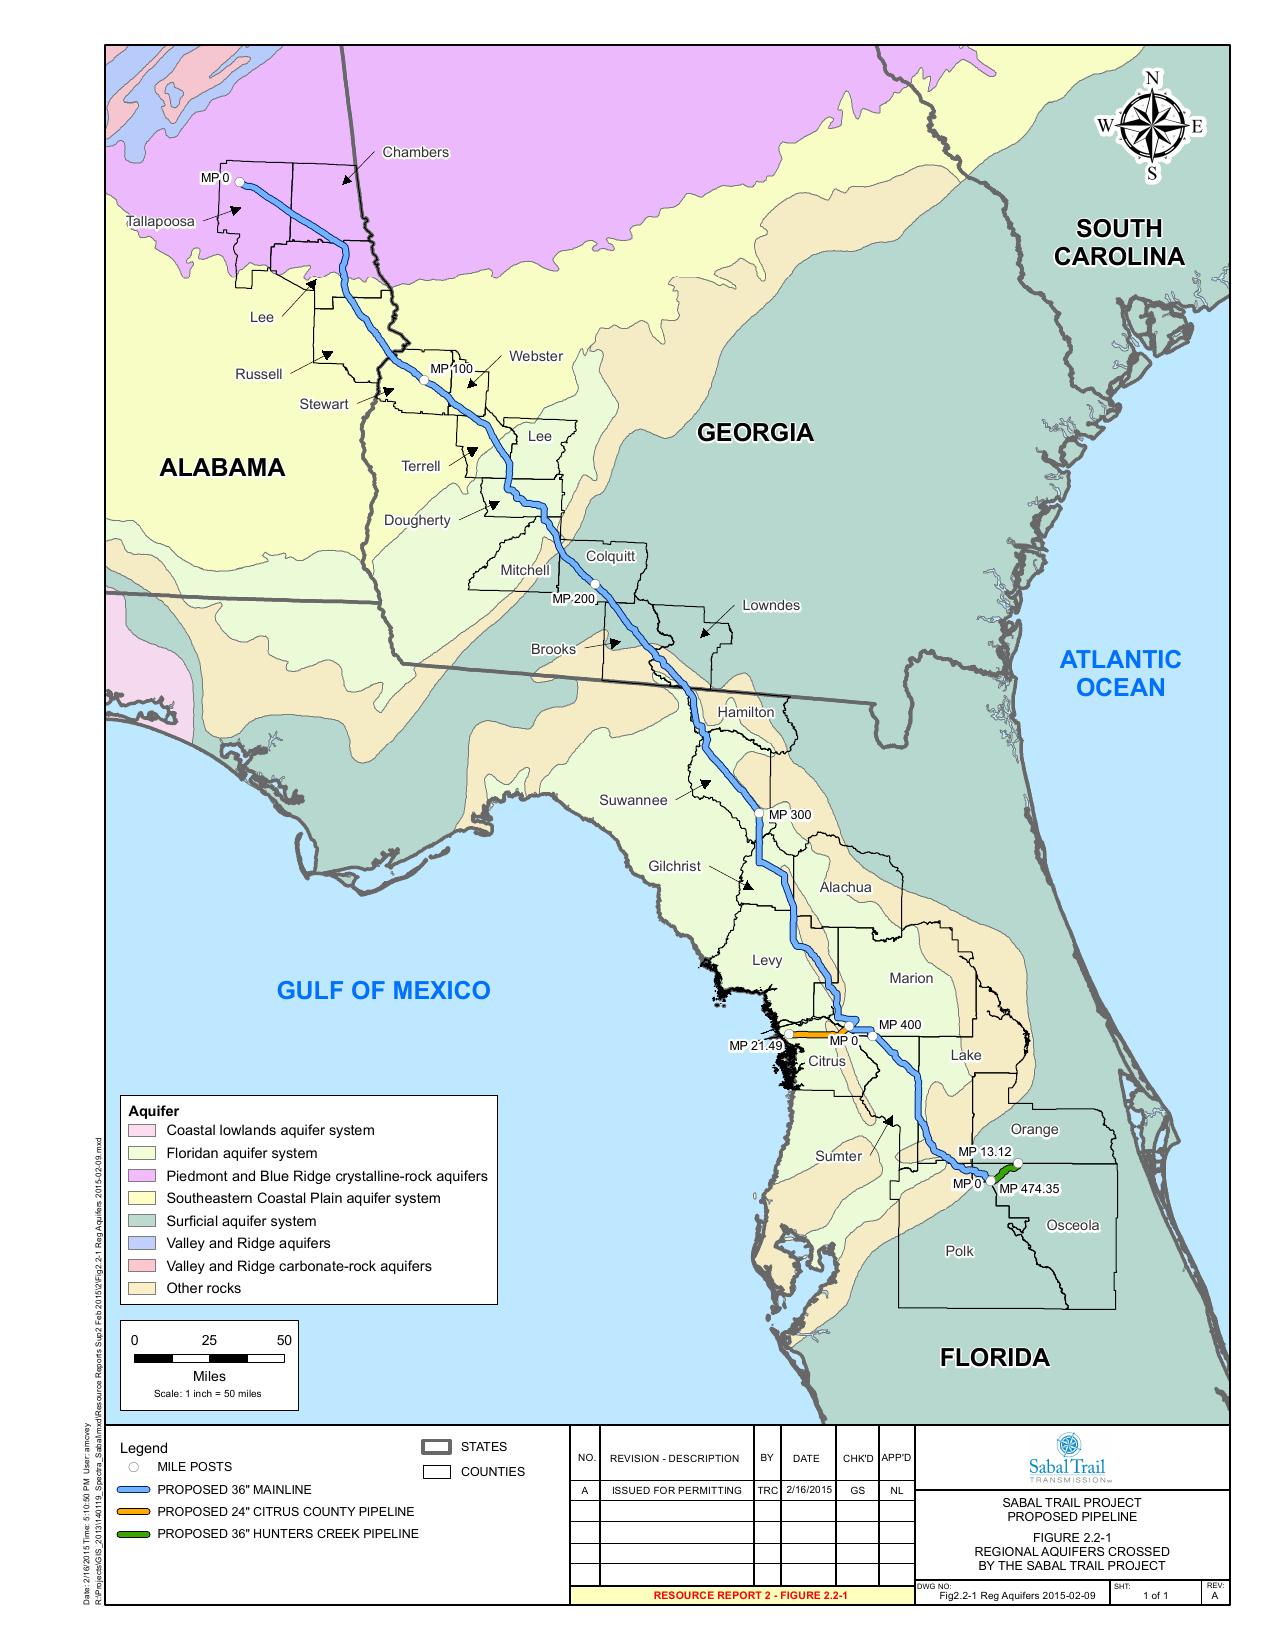 1275x1650 Figure 2.2-1, in Regional Aquifers Crossed by the Sabal Trail Project, by John S. Quarterman, for SpectraBusters.org, 20 February 2015